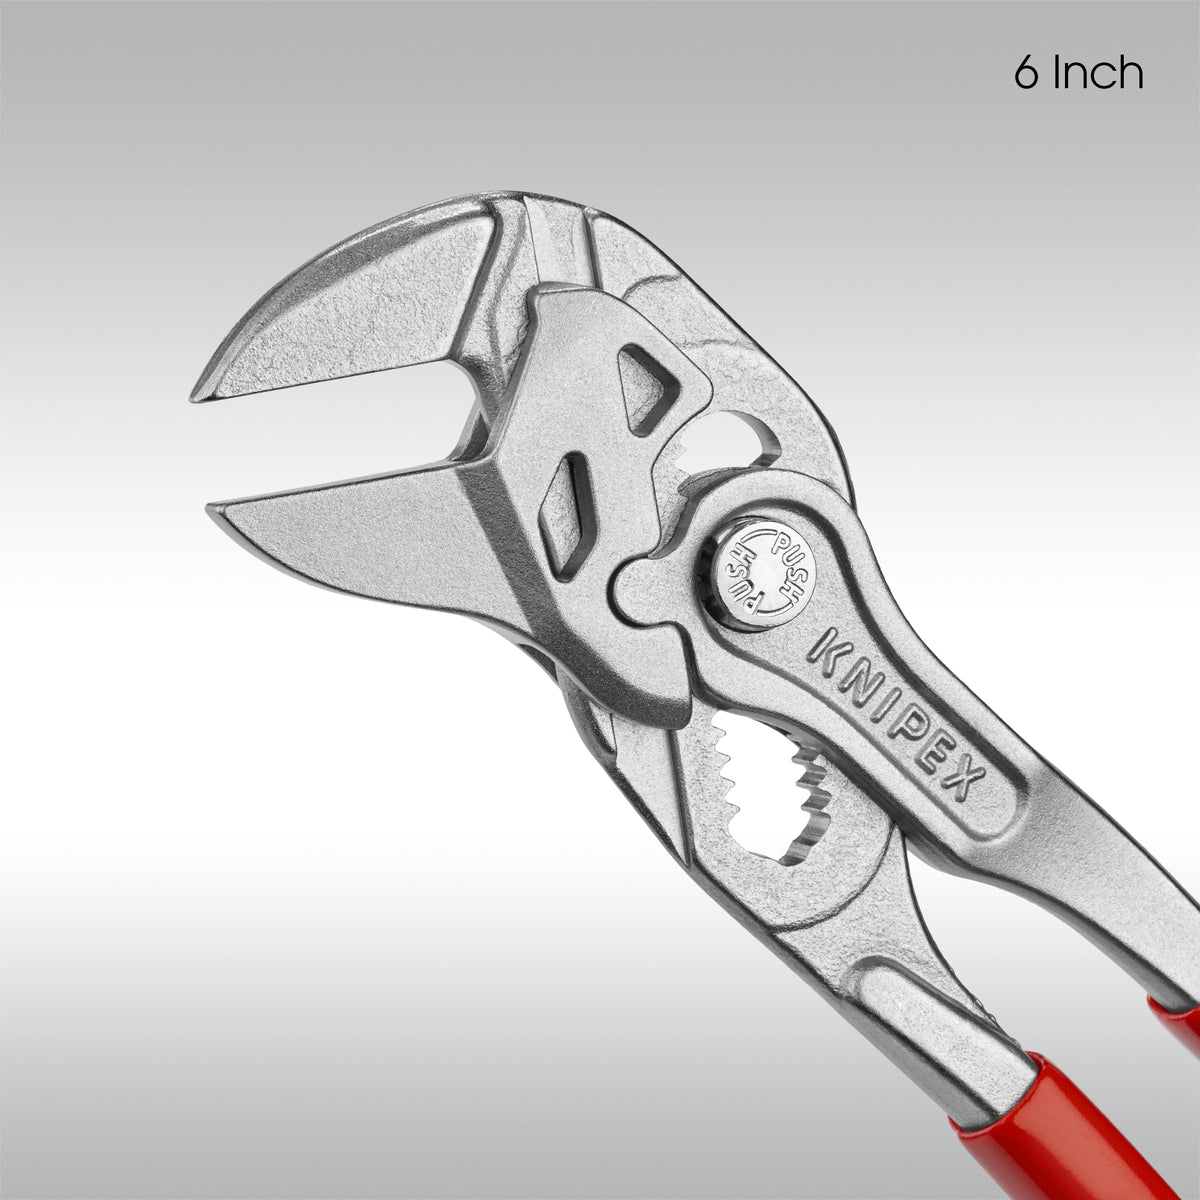 KNIPEX - PLIERS WRENCH, CHROME 6IN